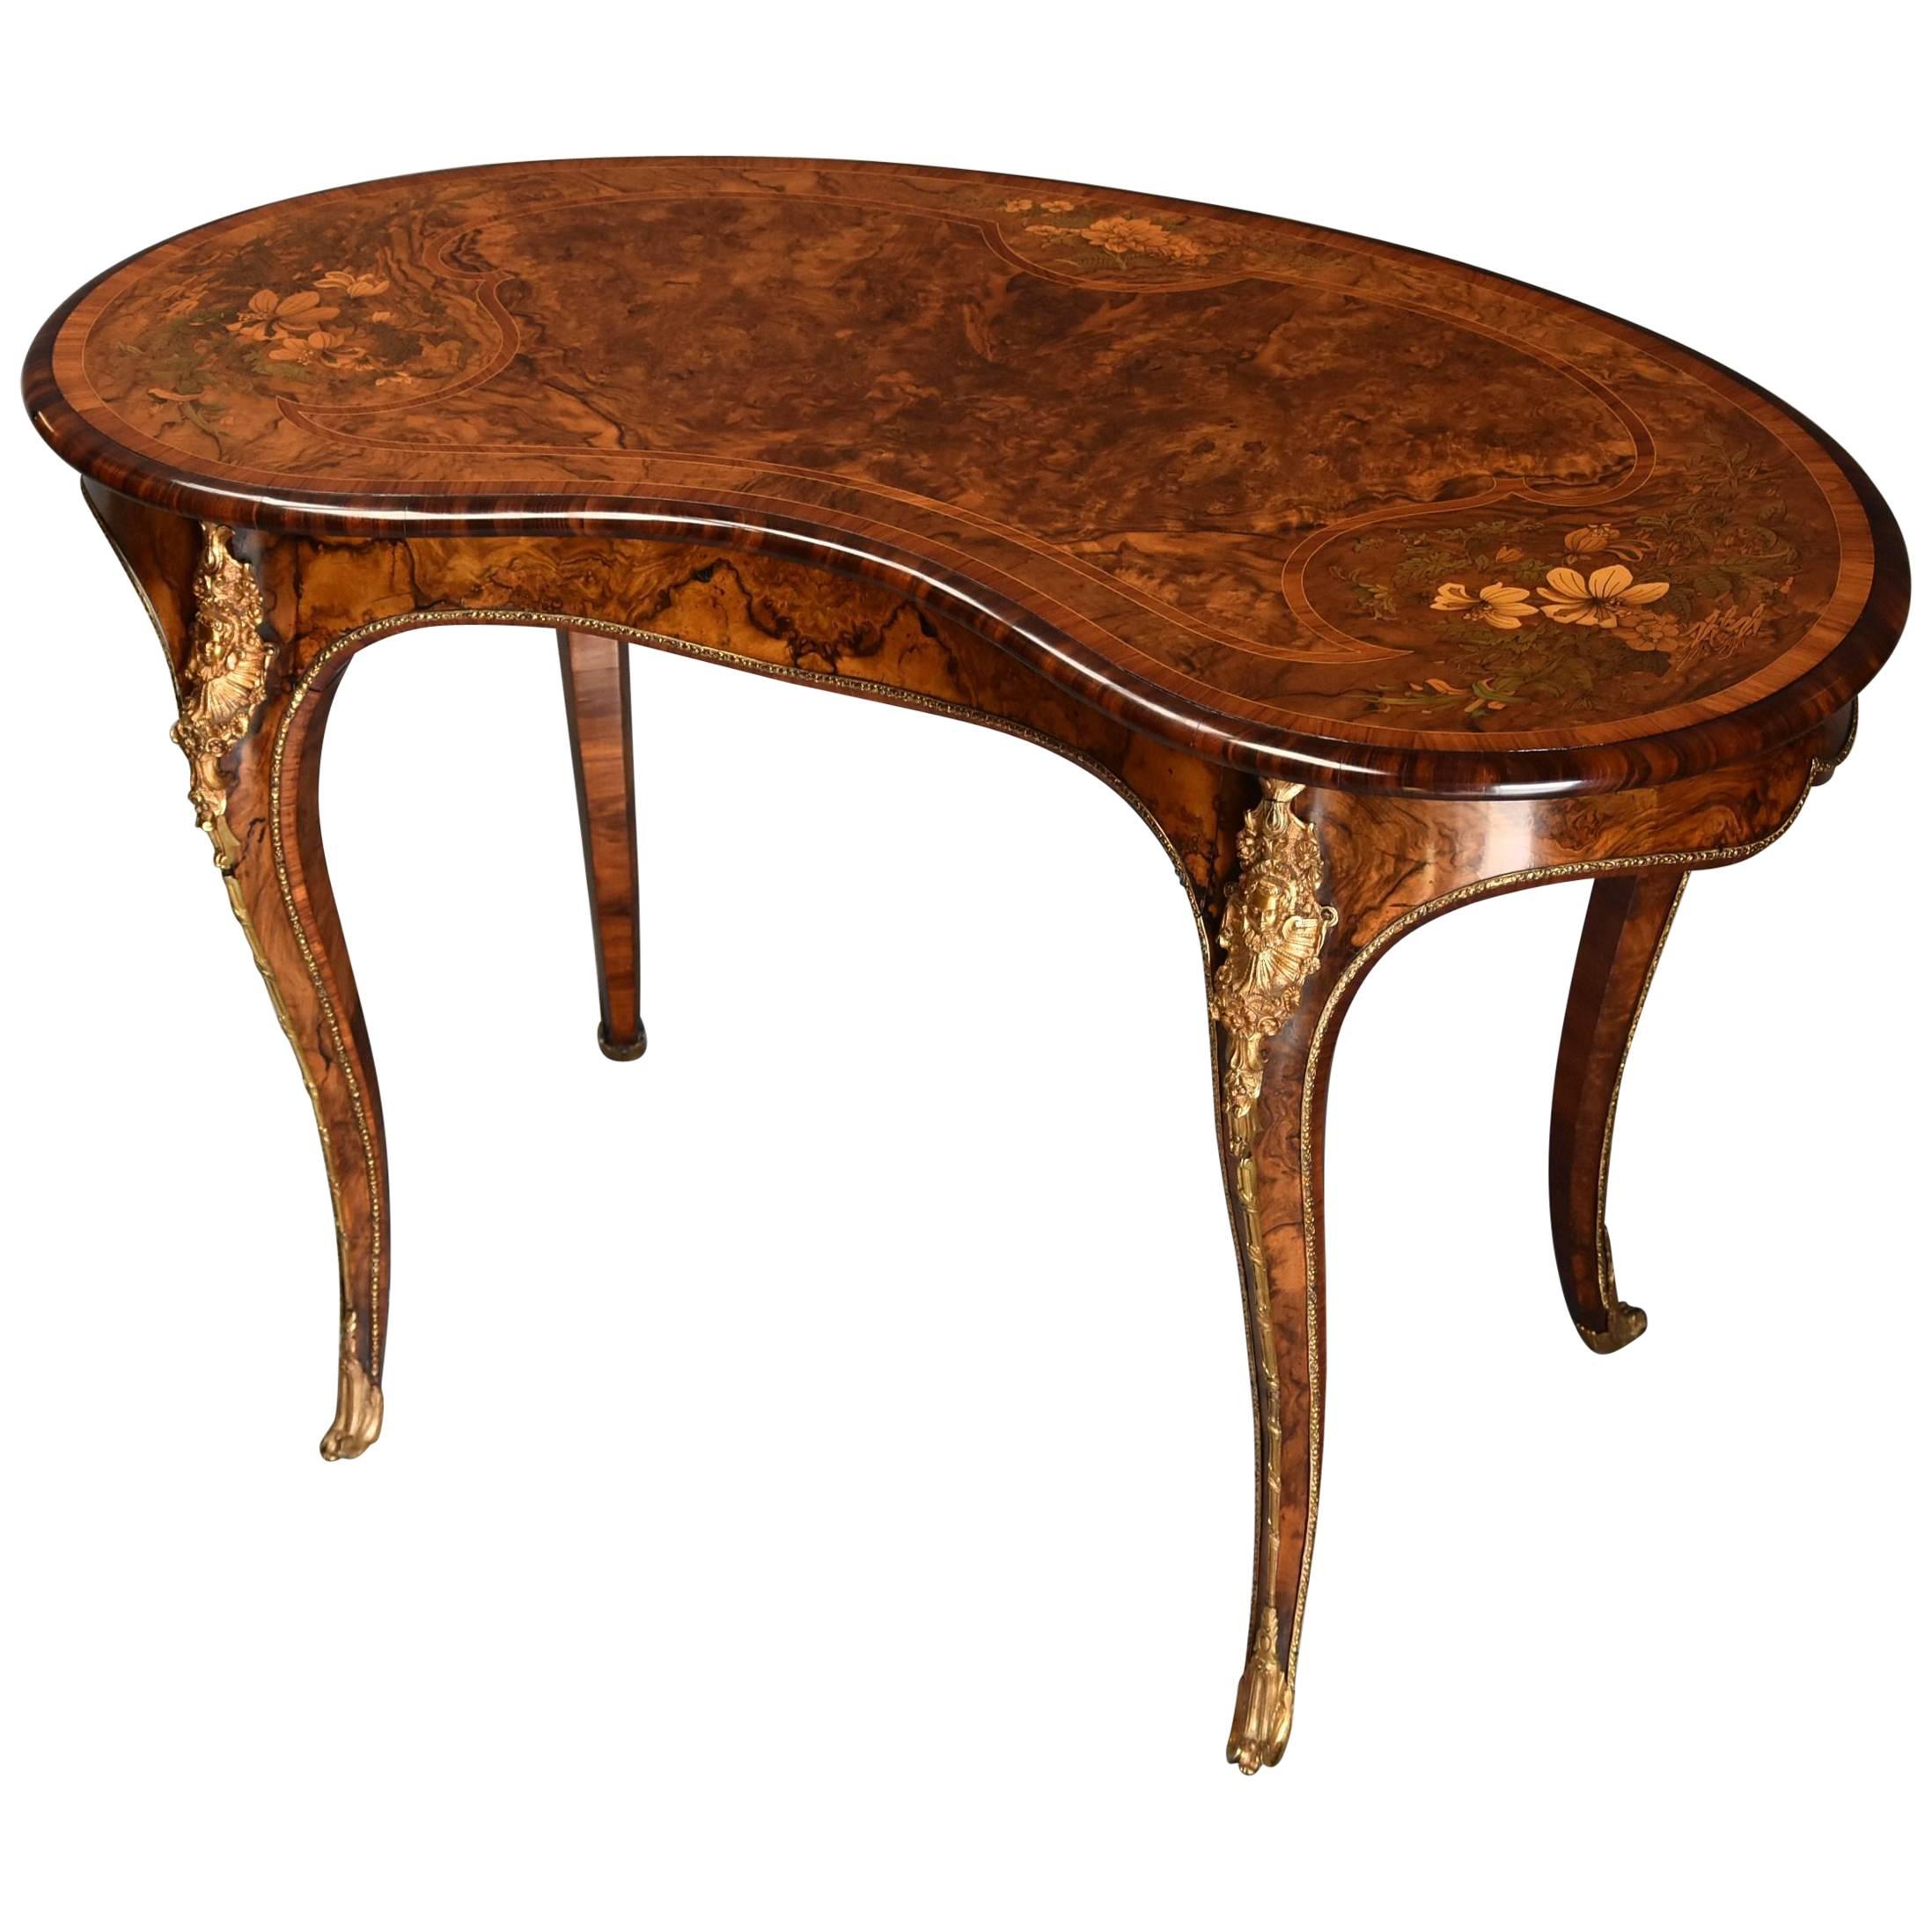 Superb Quality Mid-19th Century Burr Walnut and Marquetry Kidney Shape Table For Sale